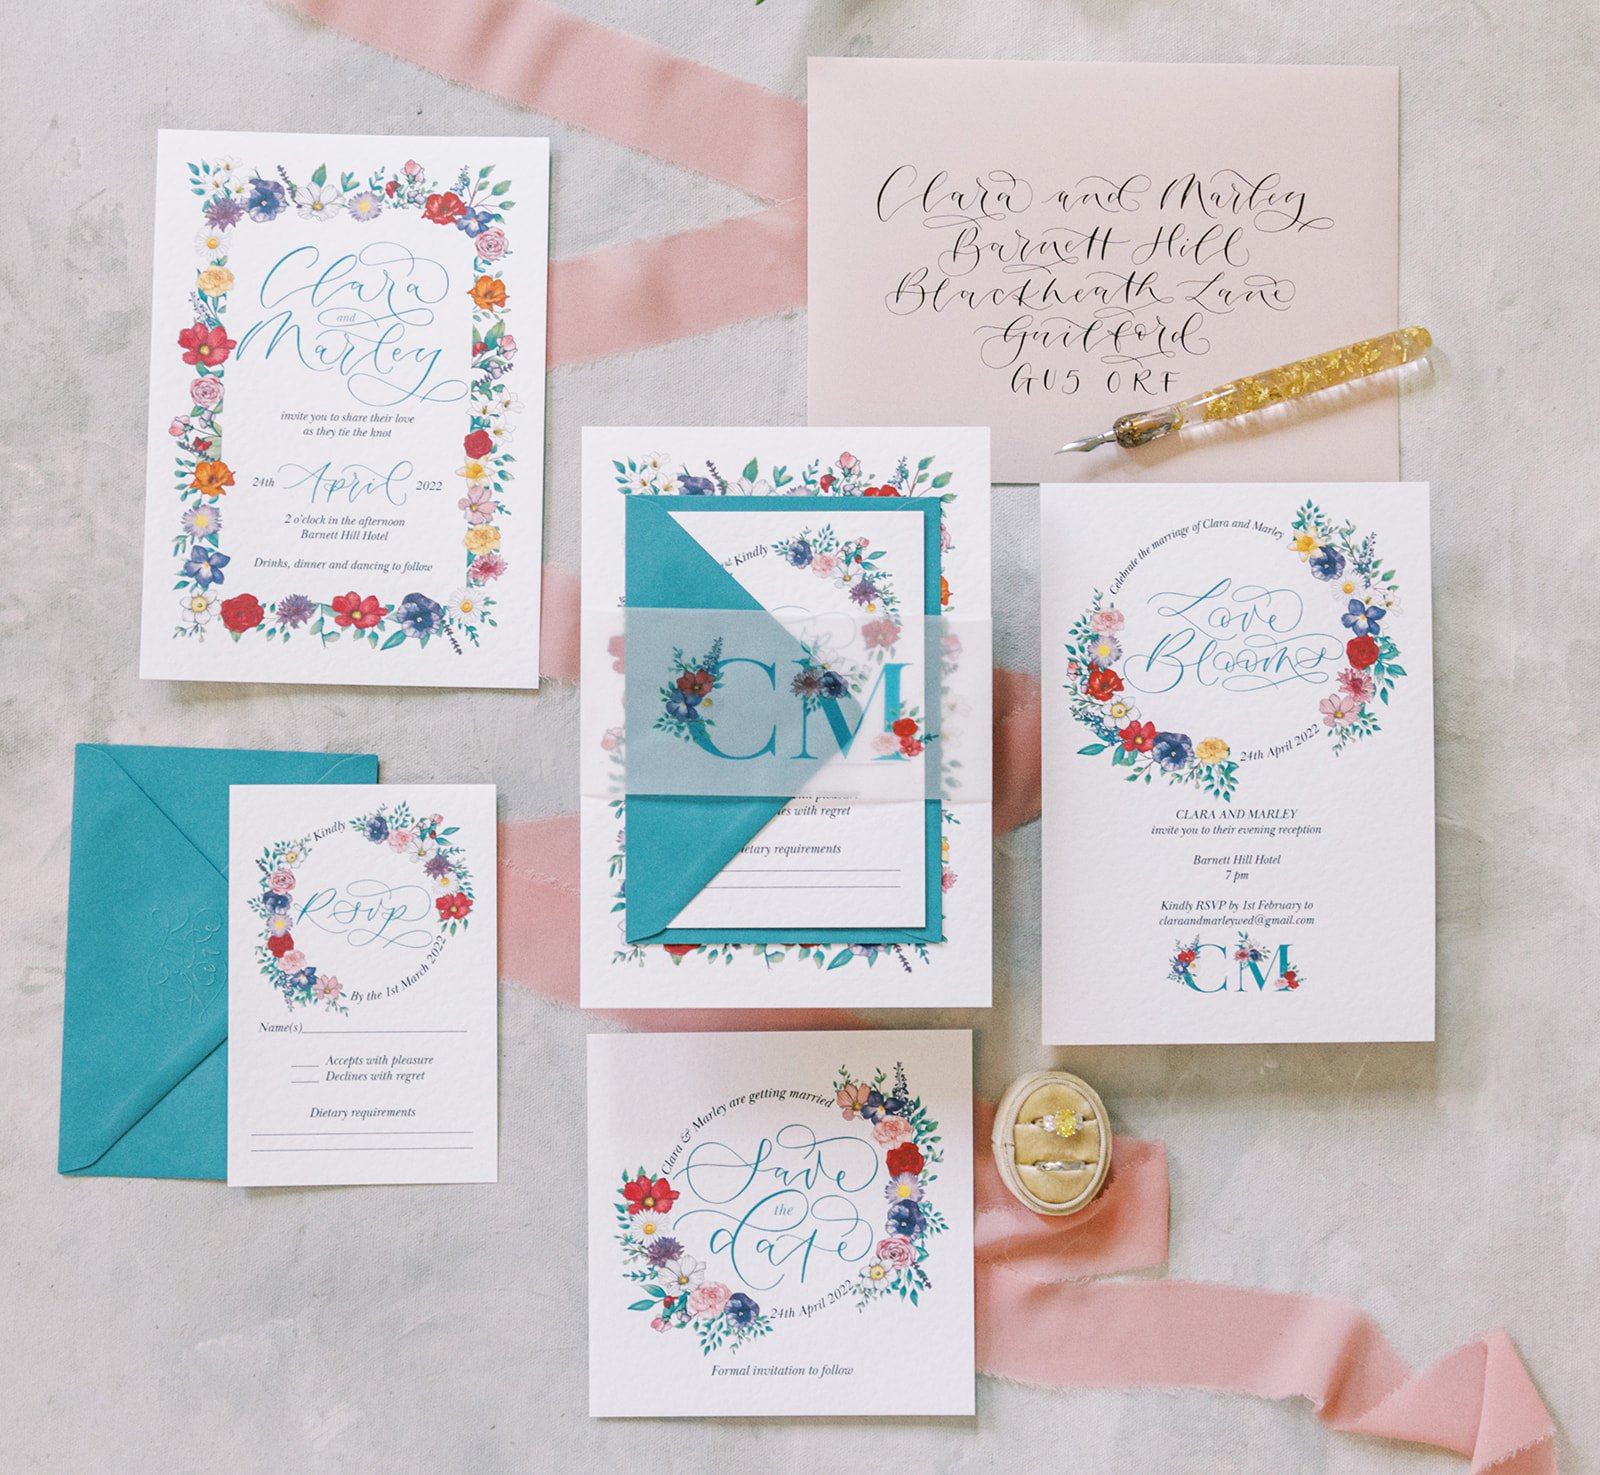 Love blooms here - floral wedding invitation suite with calligraphy  envelope, details card, rsvp, save the date and evening invitation - teal and pink wedding - Designed by The Amyverse.jpg